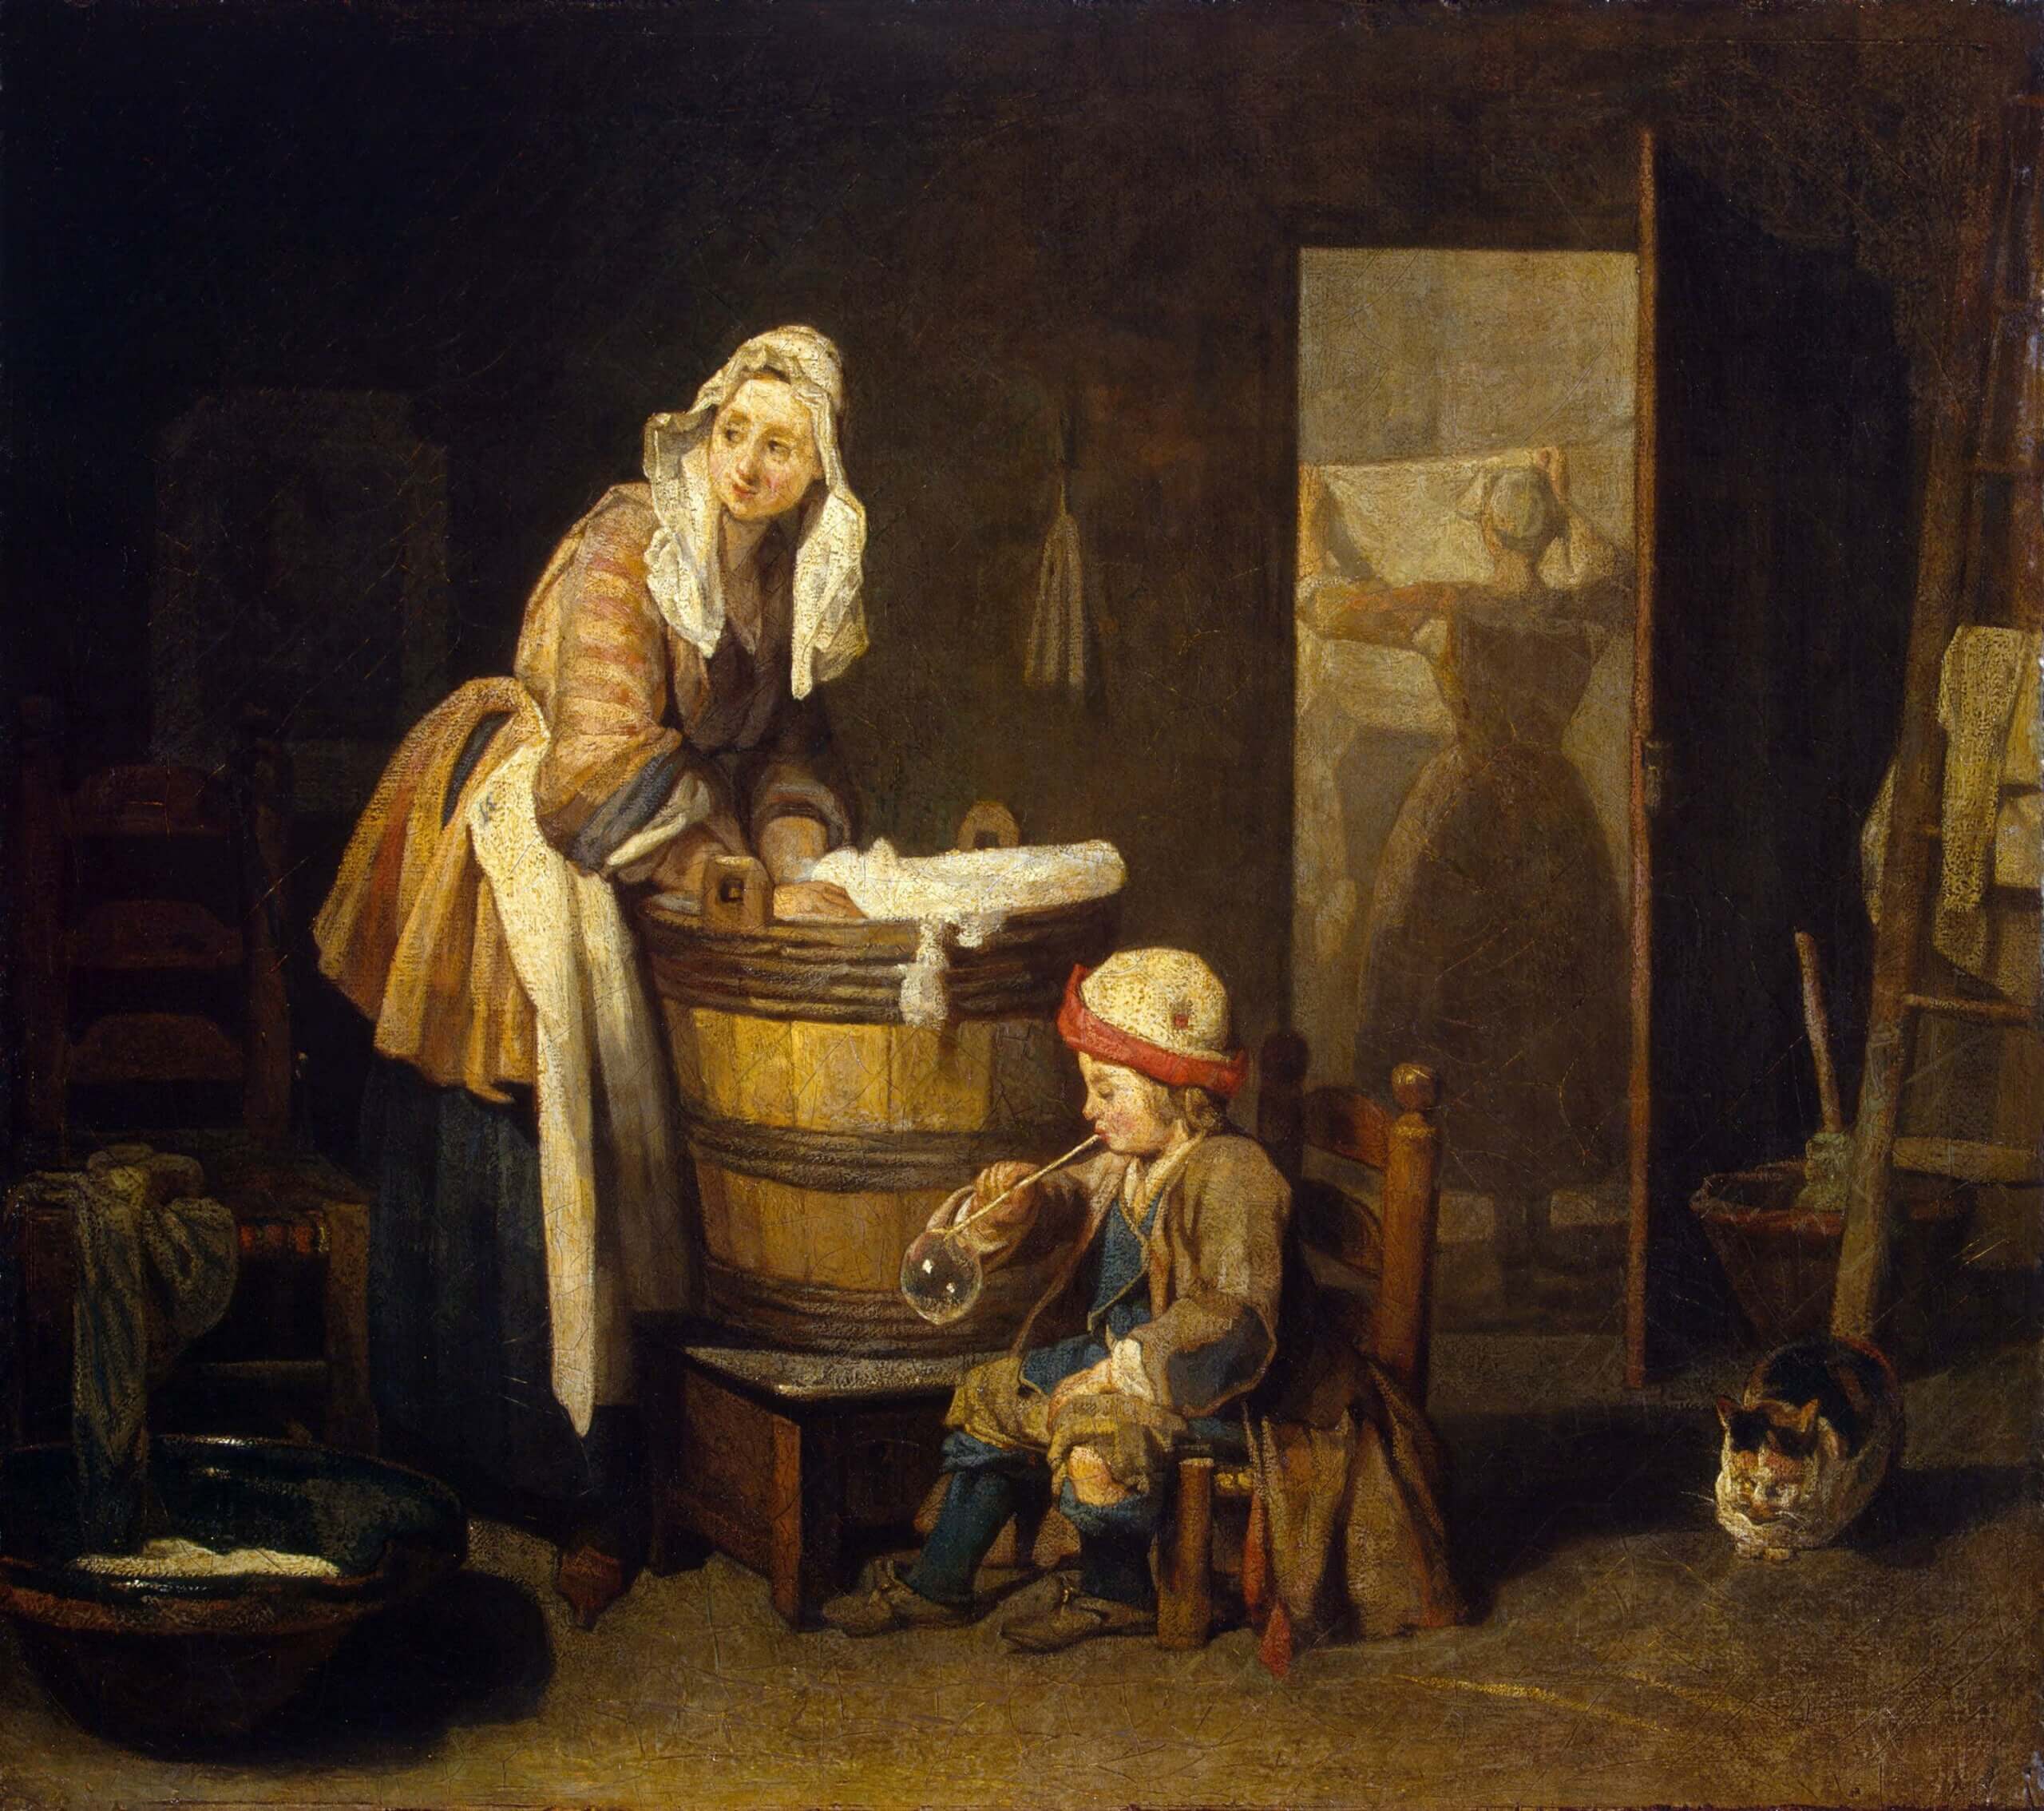 Jean Siméon Chardin, <i>The Laundress</i>, 1733, oil on canvas, 38 x 43 cm, The State Hermitage Museum